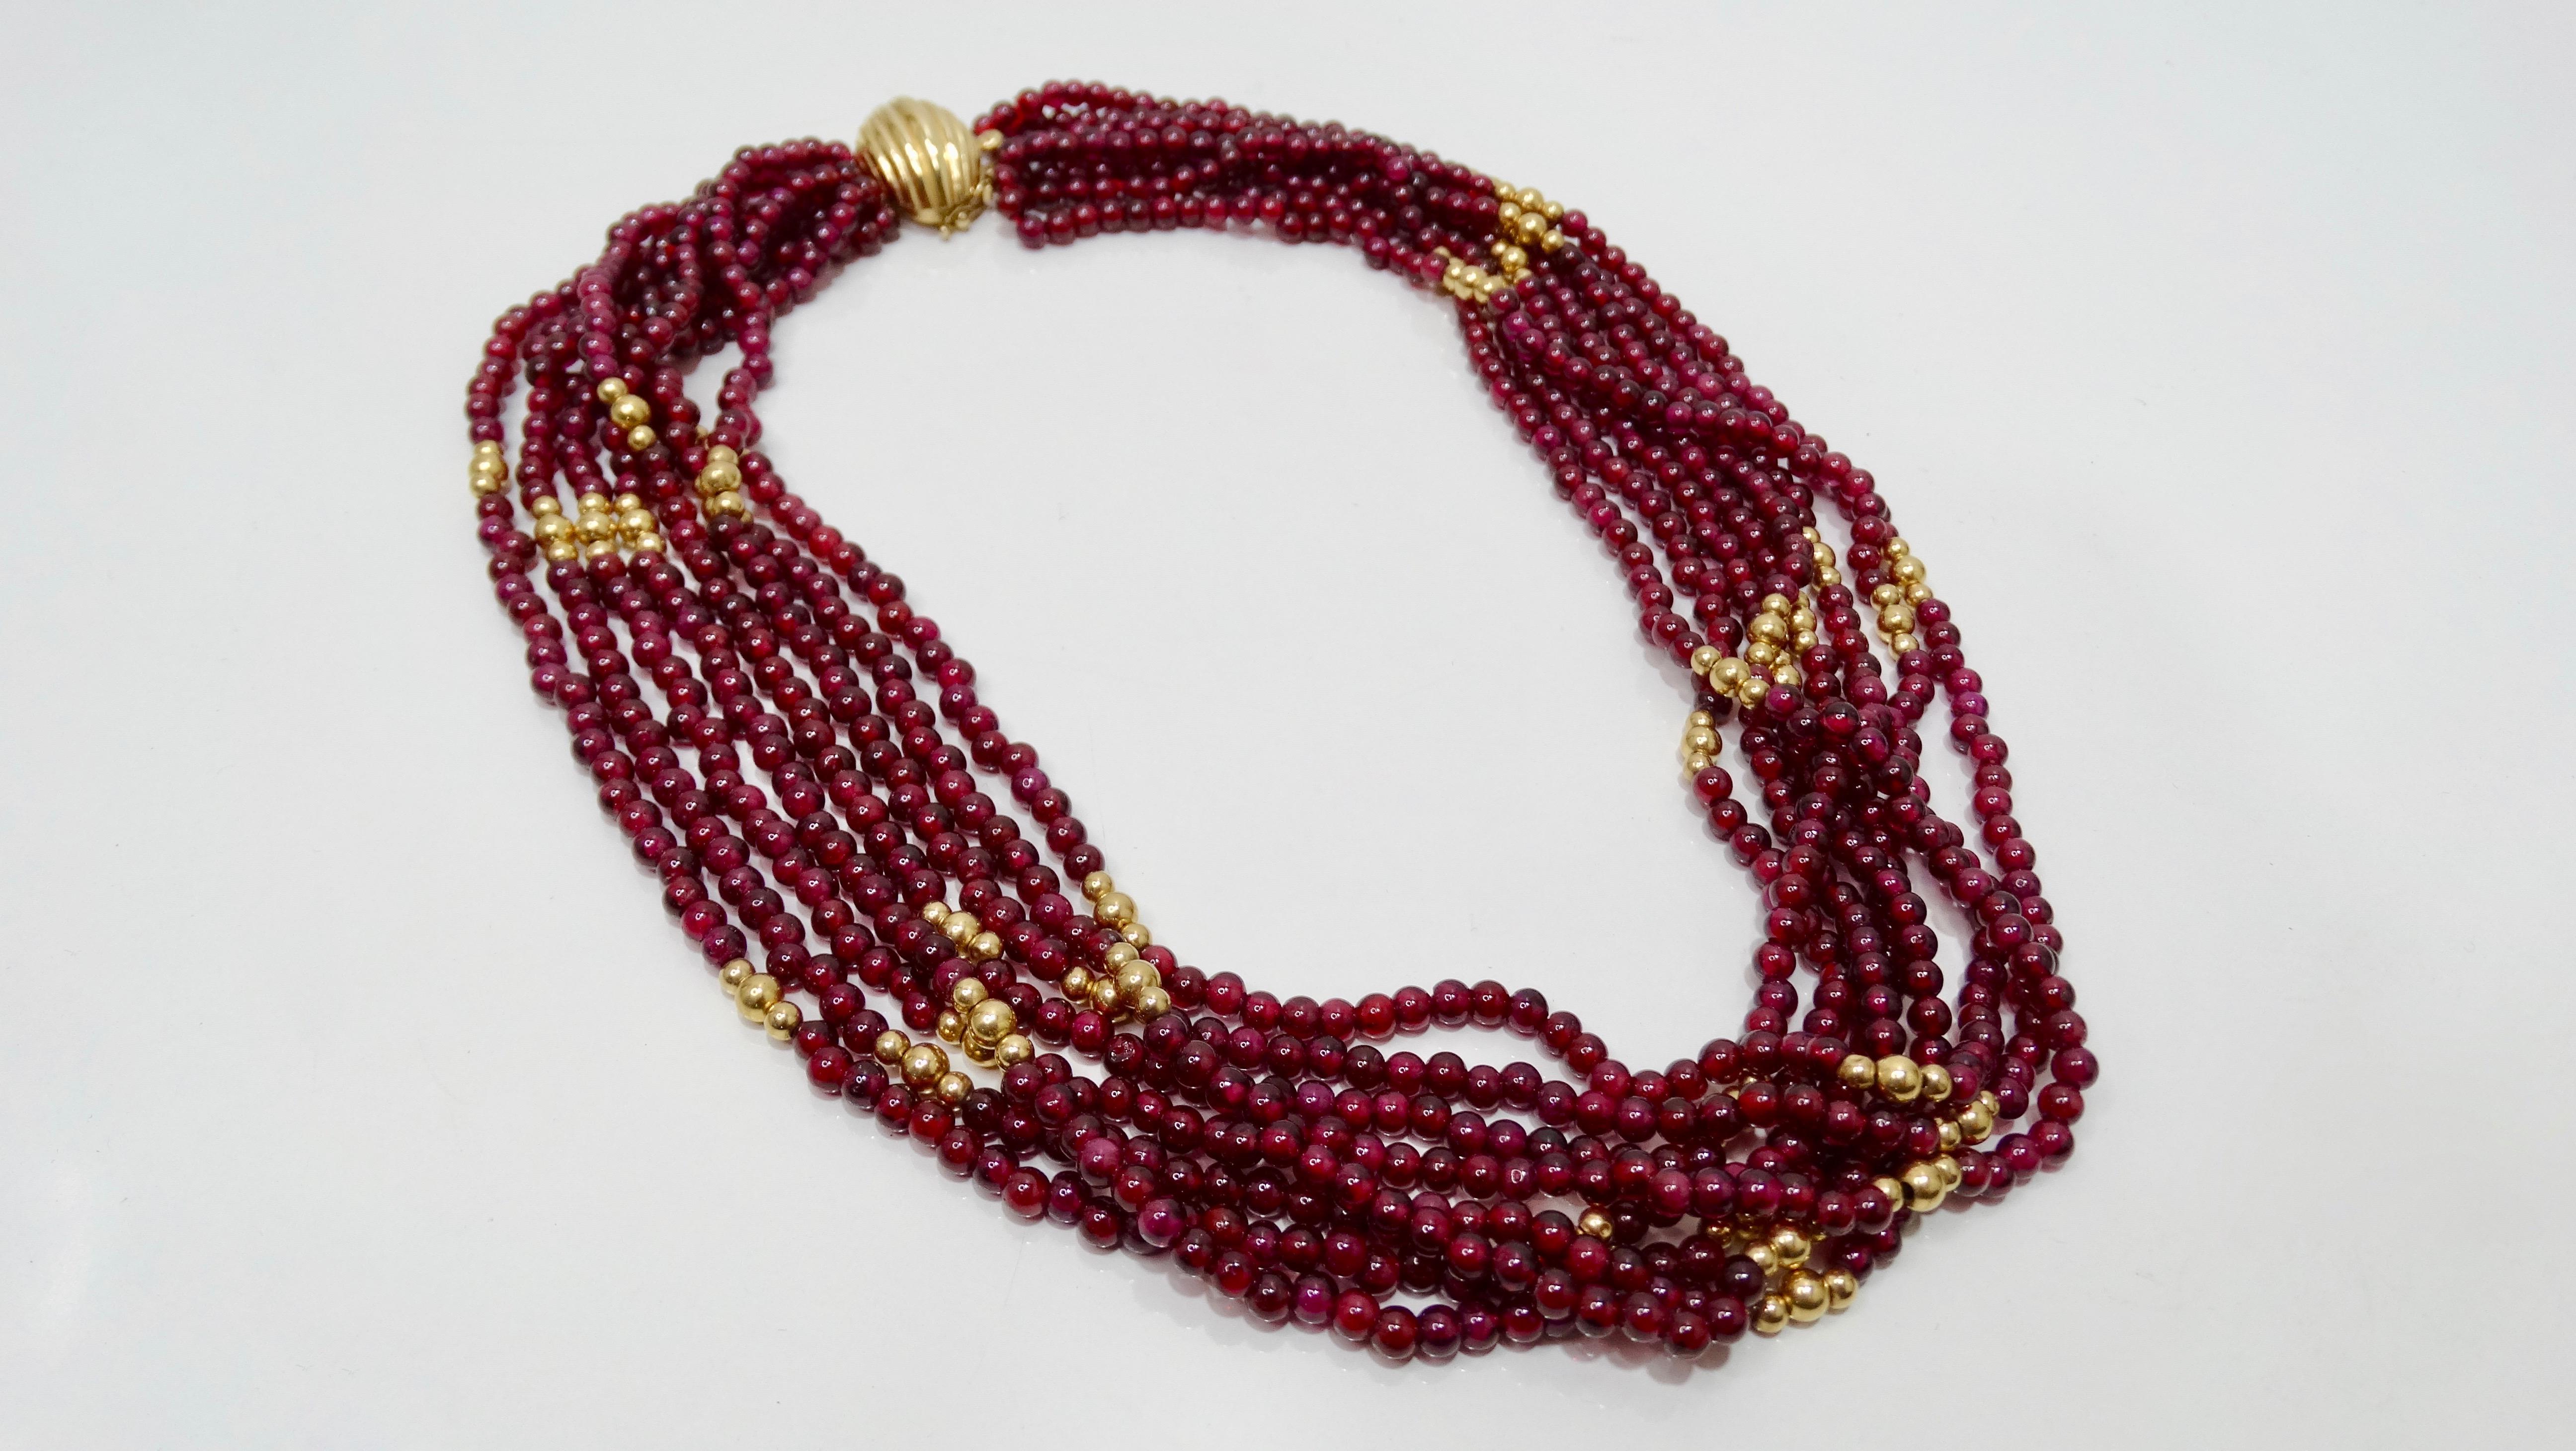 Add to your collection with this stunning Garnet and Gold necklace! Circa mid-20th century, this multi-strand necklace features 8 beaded rows of approximately 300ct Ruby red Garnets and 14k Gold. Includes a ribbed dome press closure with a security